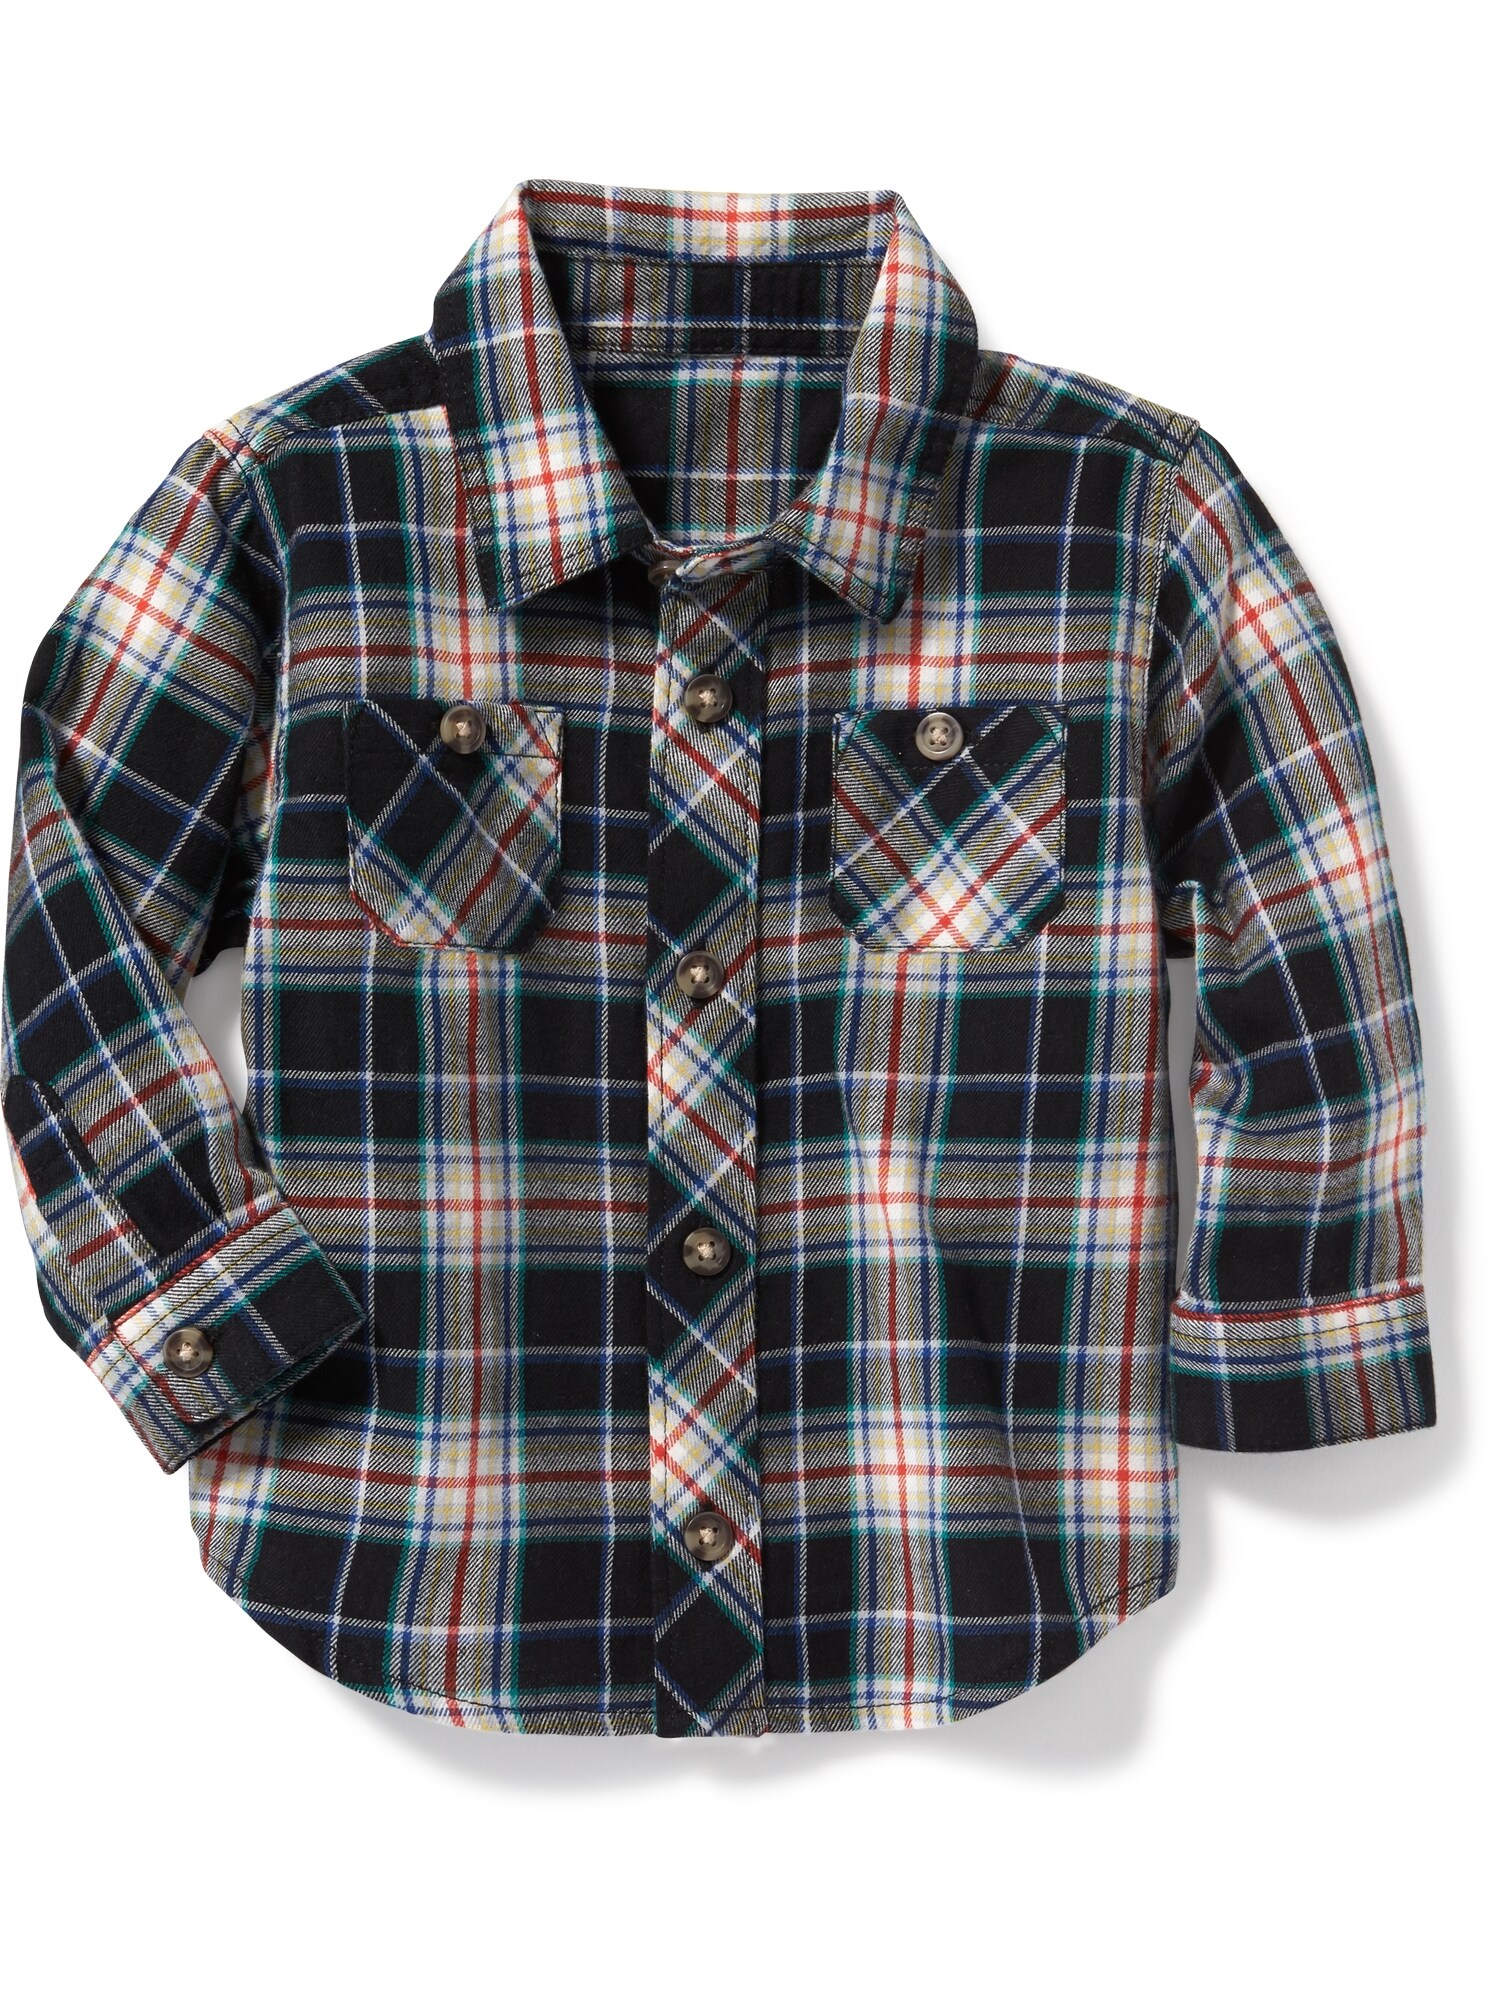 Plaid Double-Pocket Shirt for Baby | Old Navy